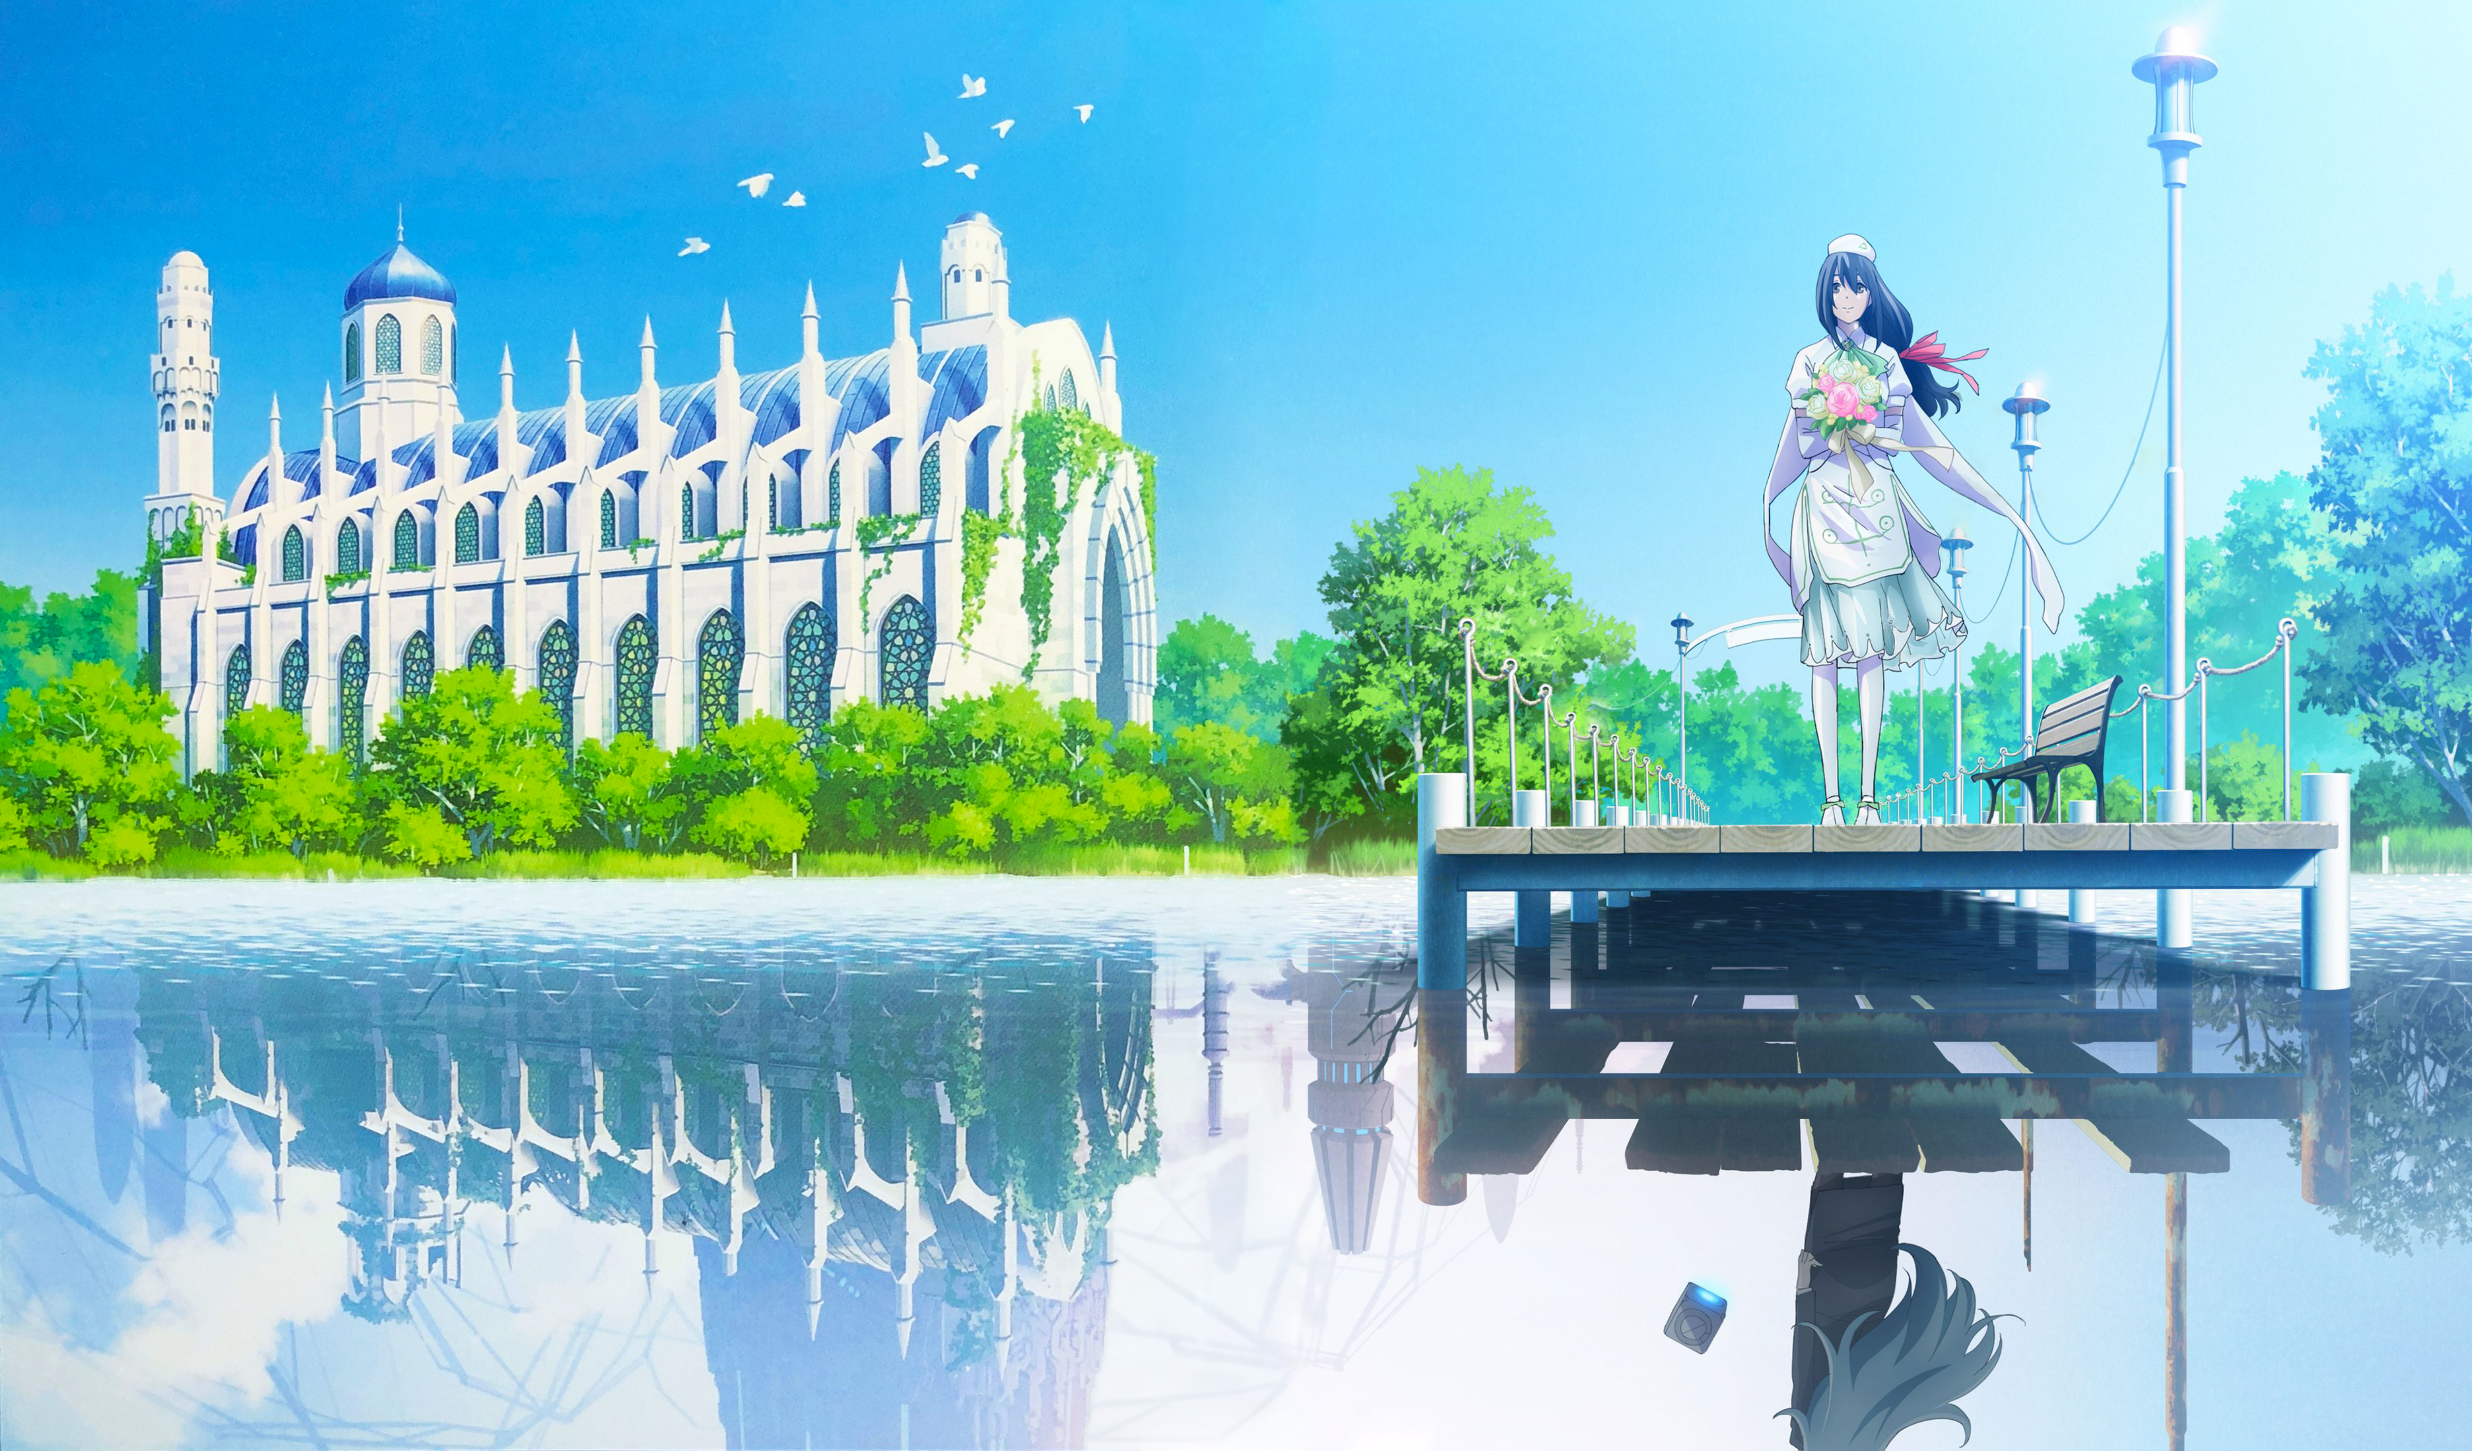 Anime 2472x1451 Vivy: Fluorite Eye’s Song Grace (Vivy: Fluorite eye's song) Vivy science fiction anime girls reflection water looking away elbow gloves flowers smiling closed mouth long hair church building jetty bench trees hat dress